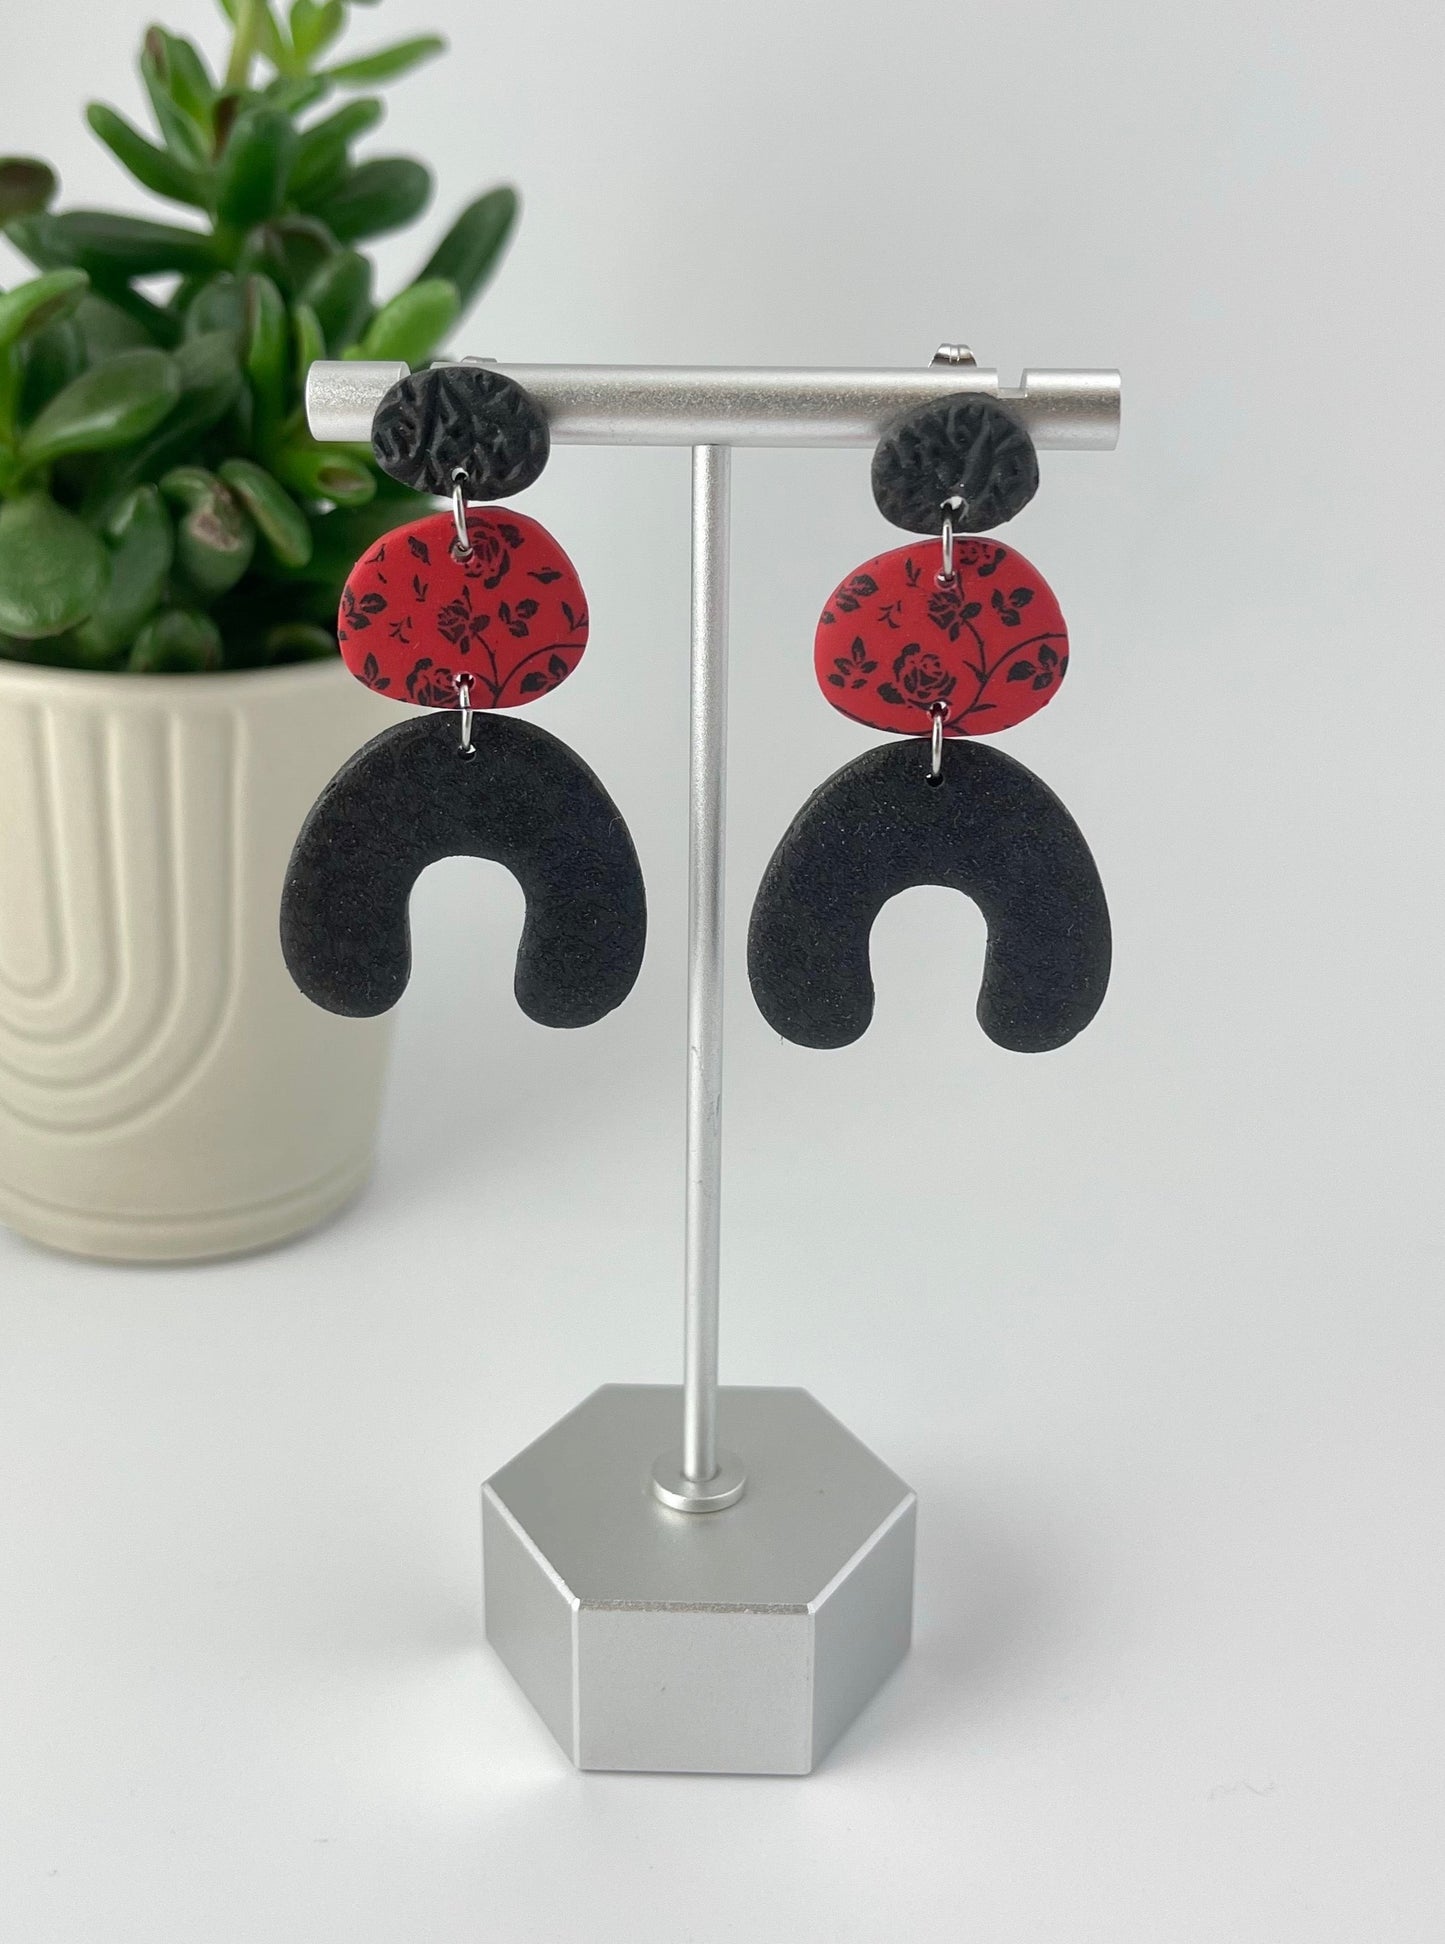 Classy Blach & Red Hanging Arch